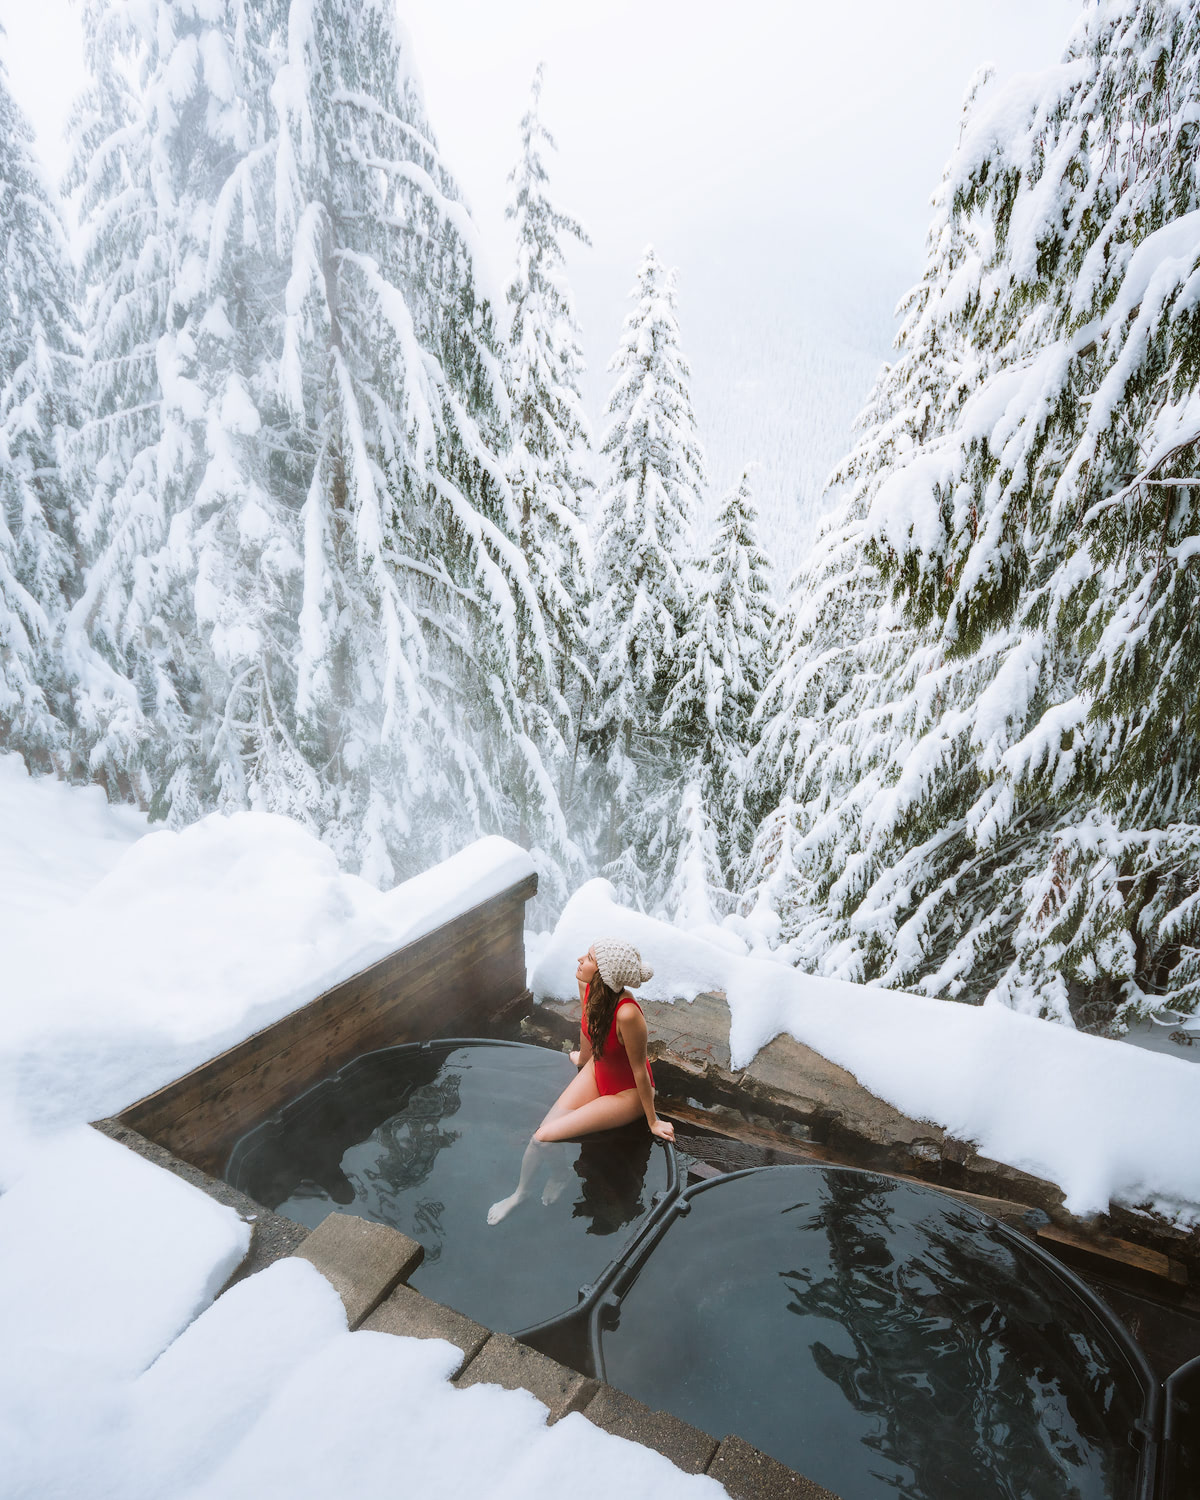 Hot Springs during winter